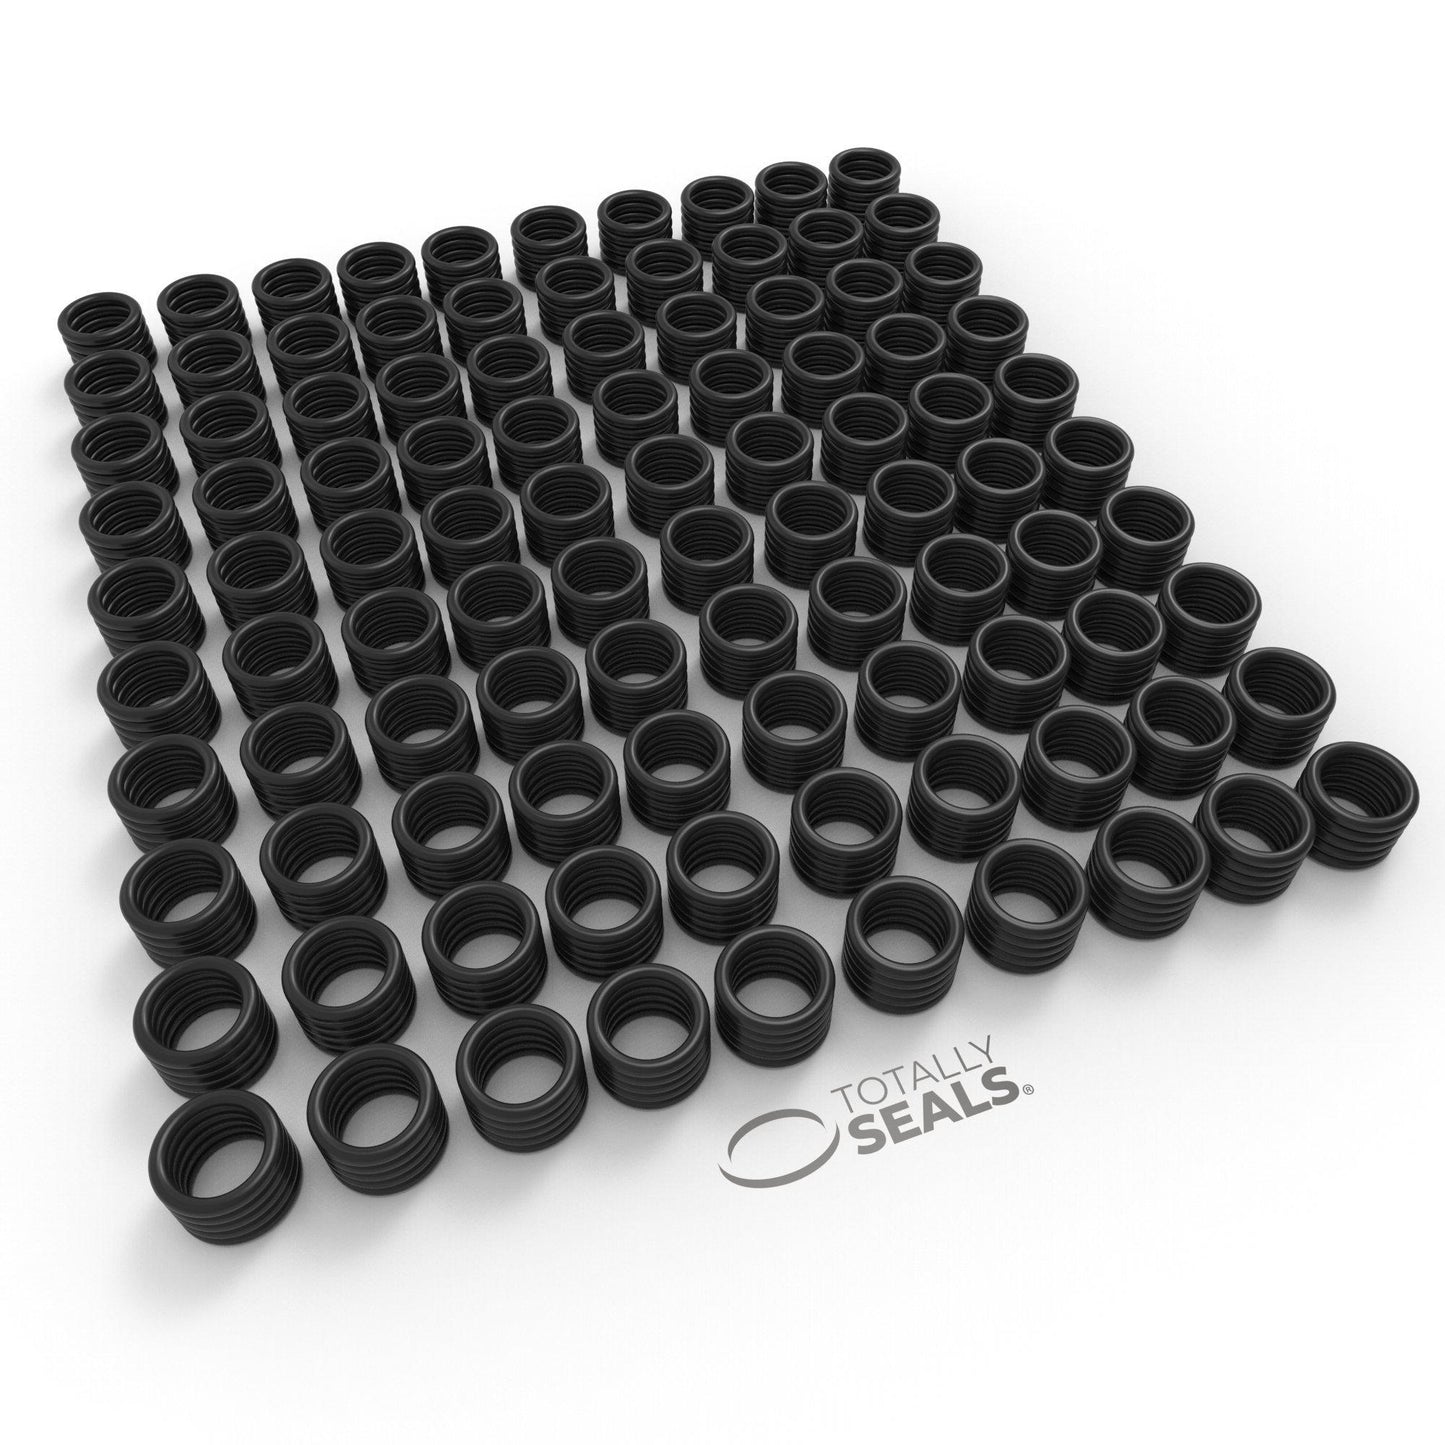 9mm x 2mm (13mm OD) Nitrile O-Rings - Totally Seals®